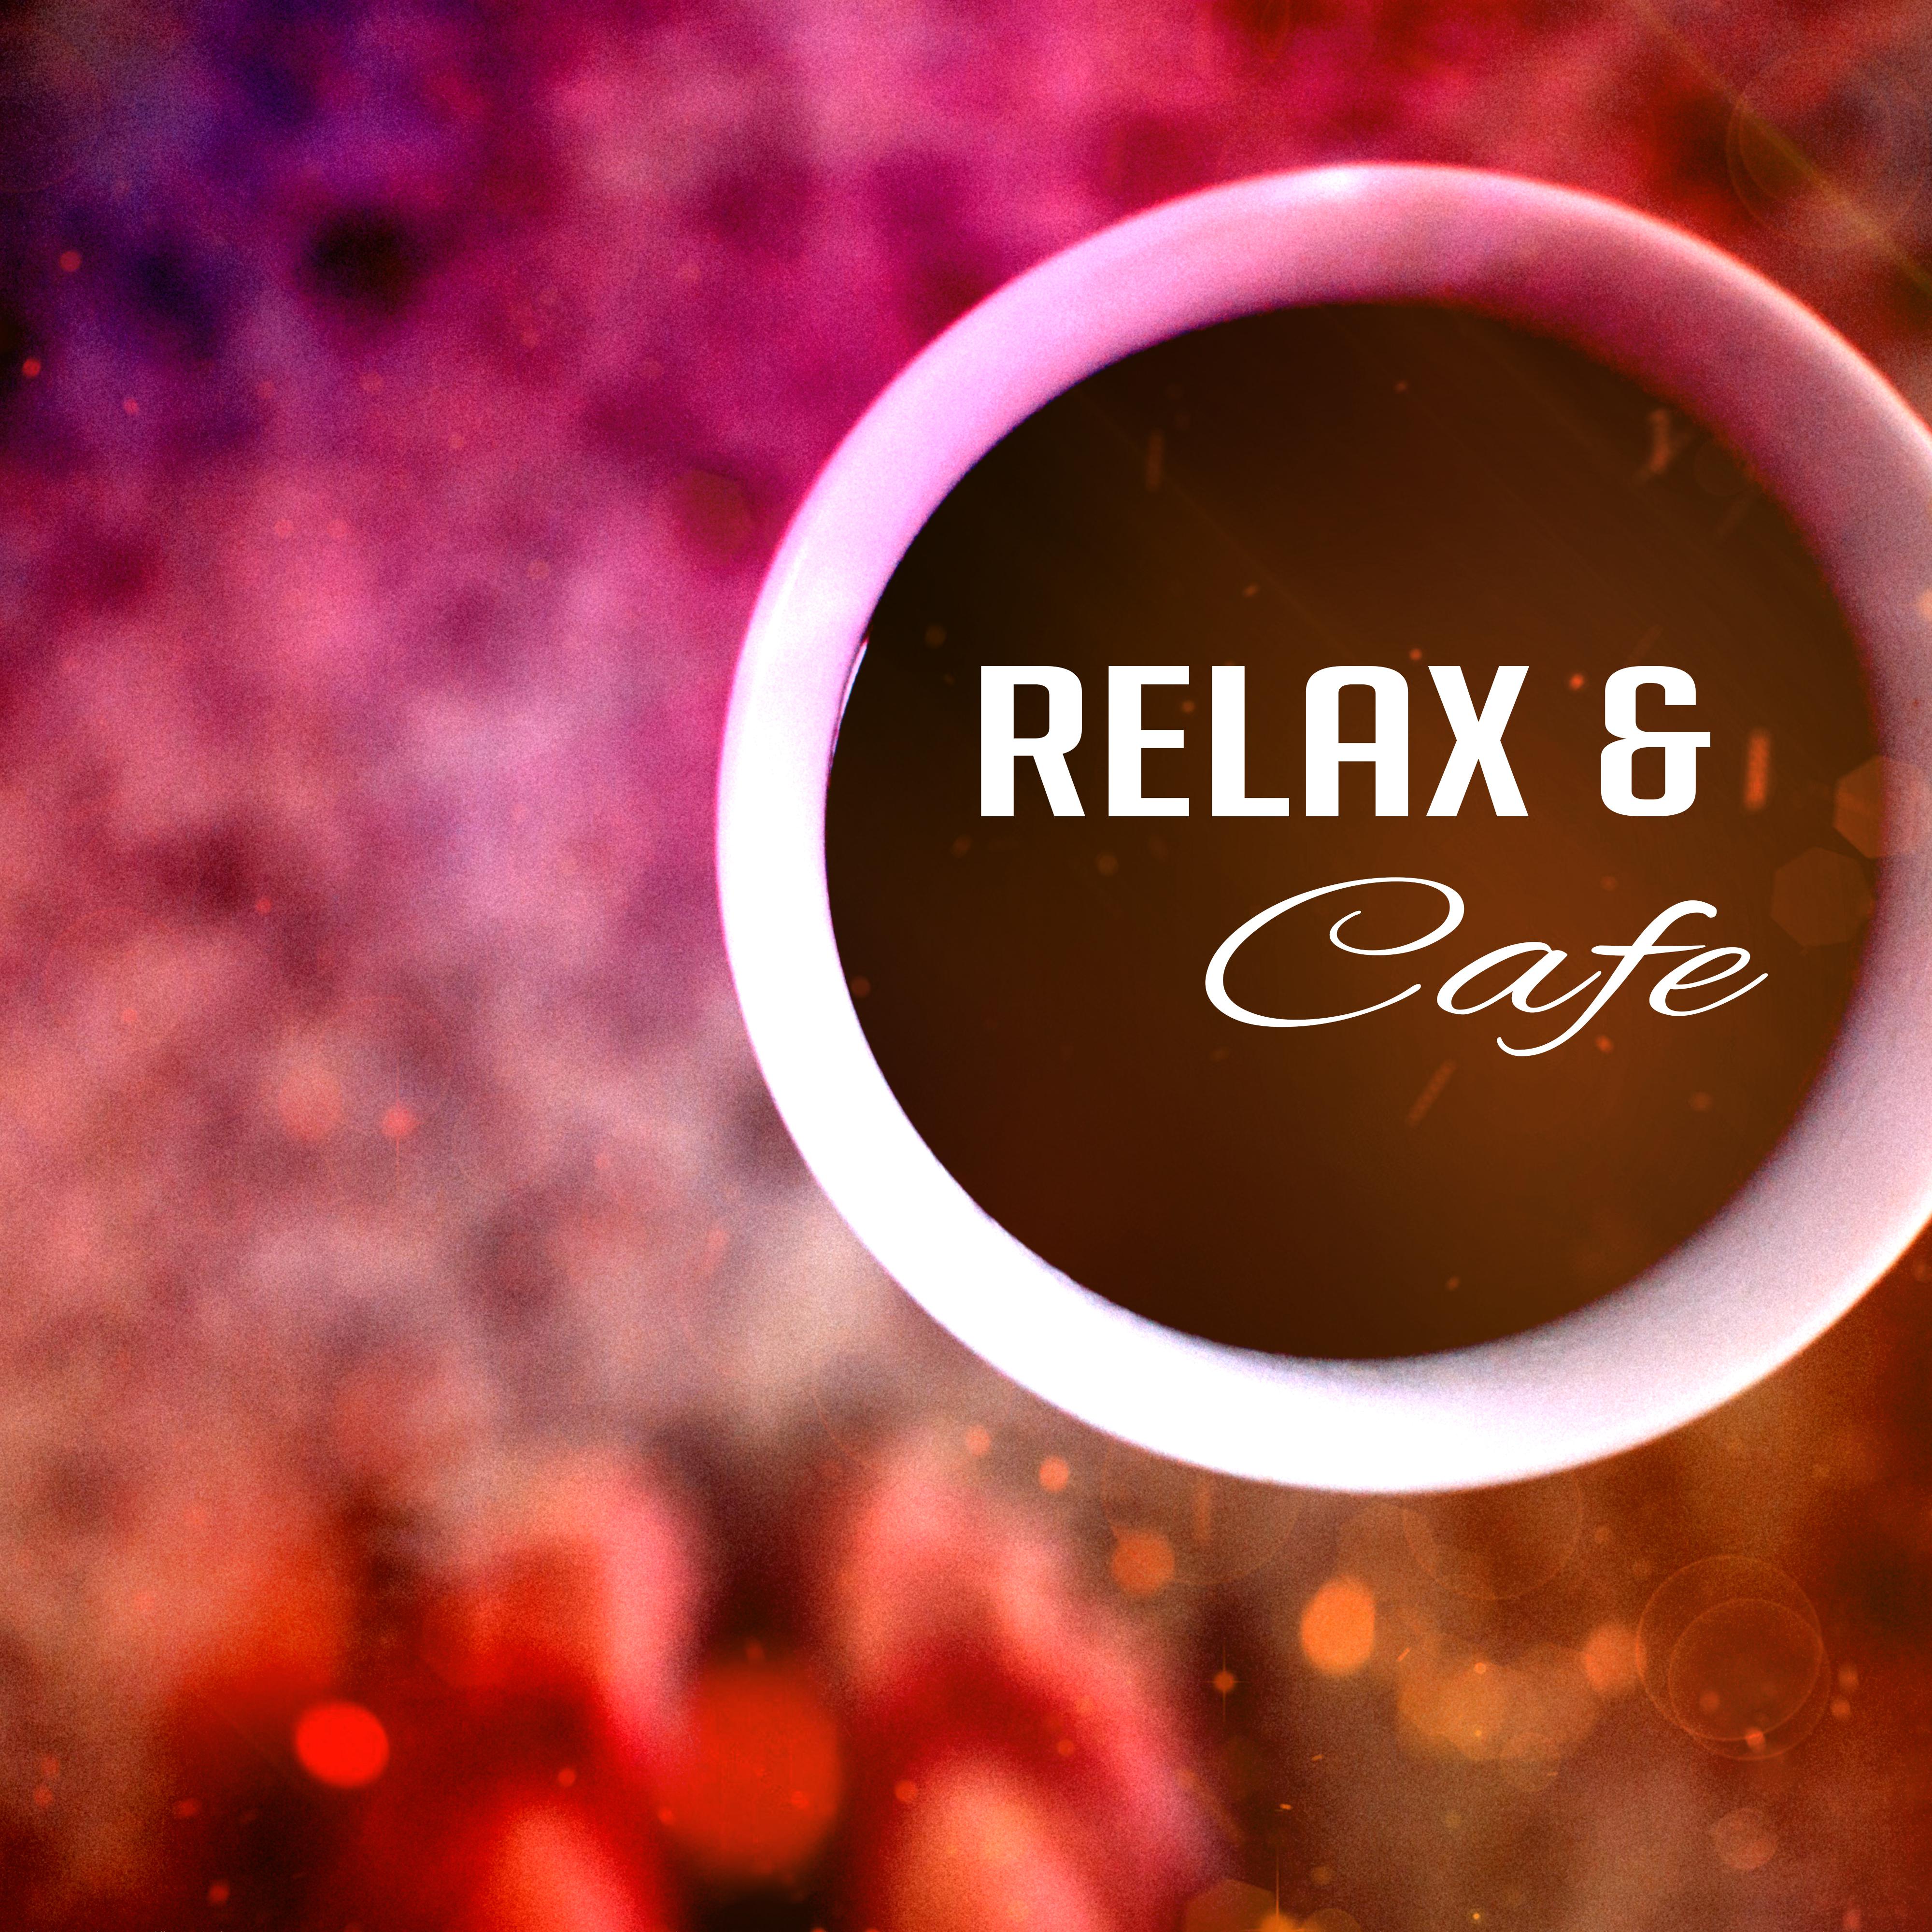 Relax & Cafe – Restaurant Music, Instrumental Music for Relaxation, Jazz Cafe, Ambient Piano Jazz Lounge, Cocktail Party, Smooth Jazz